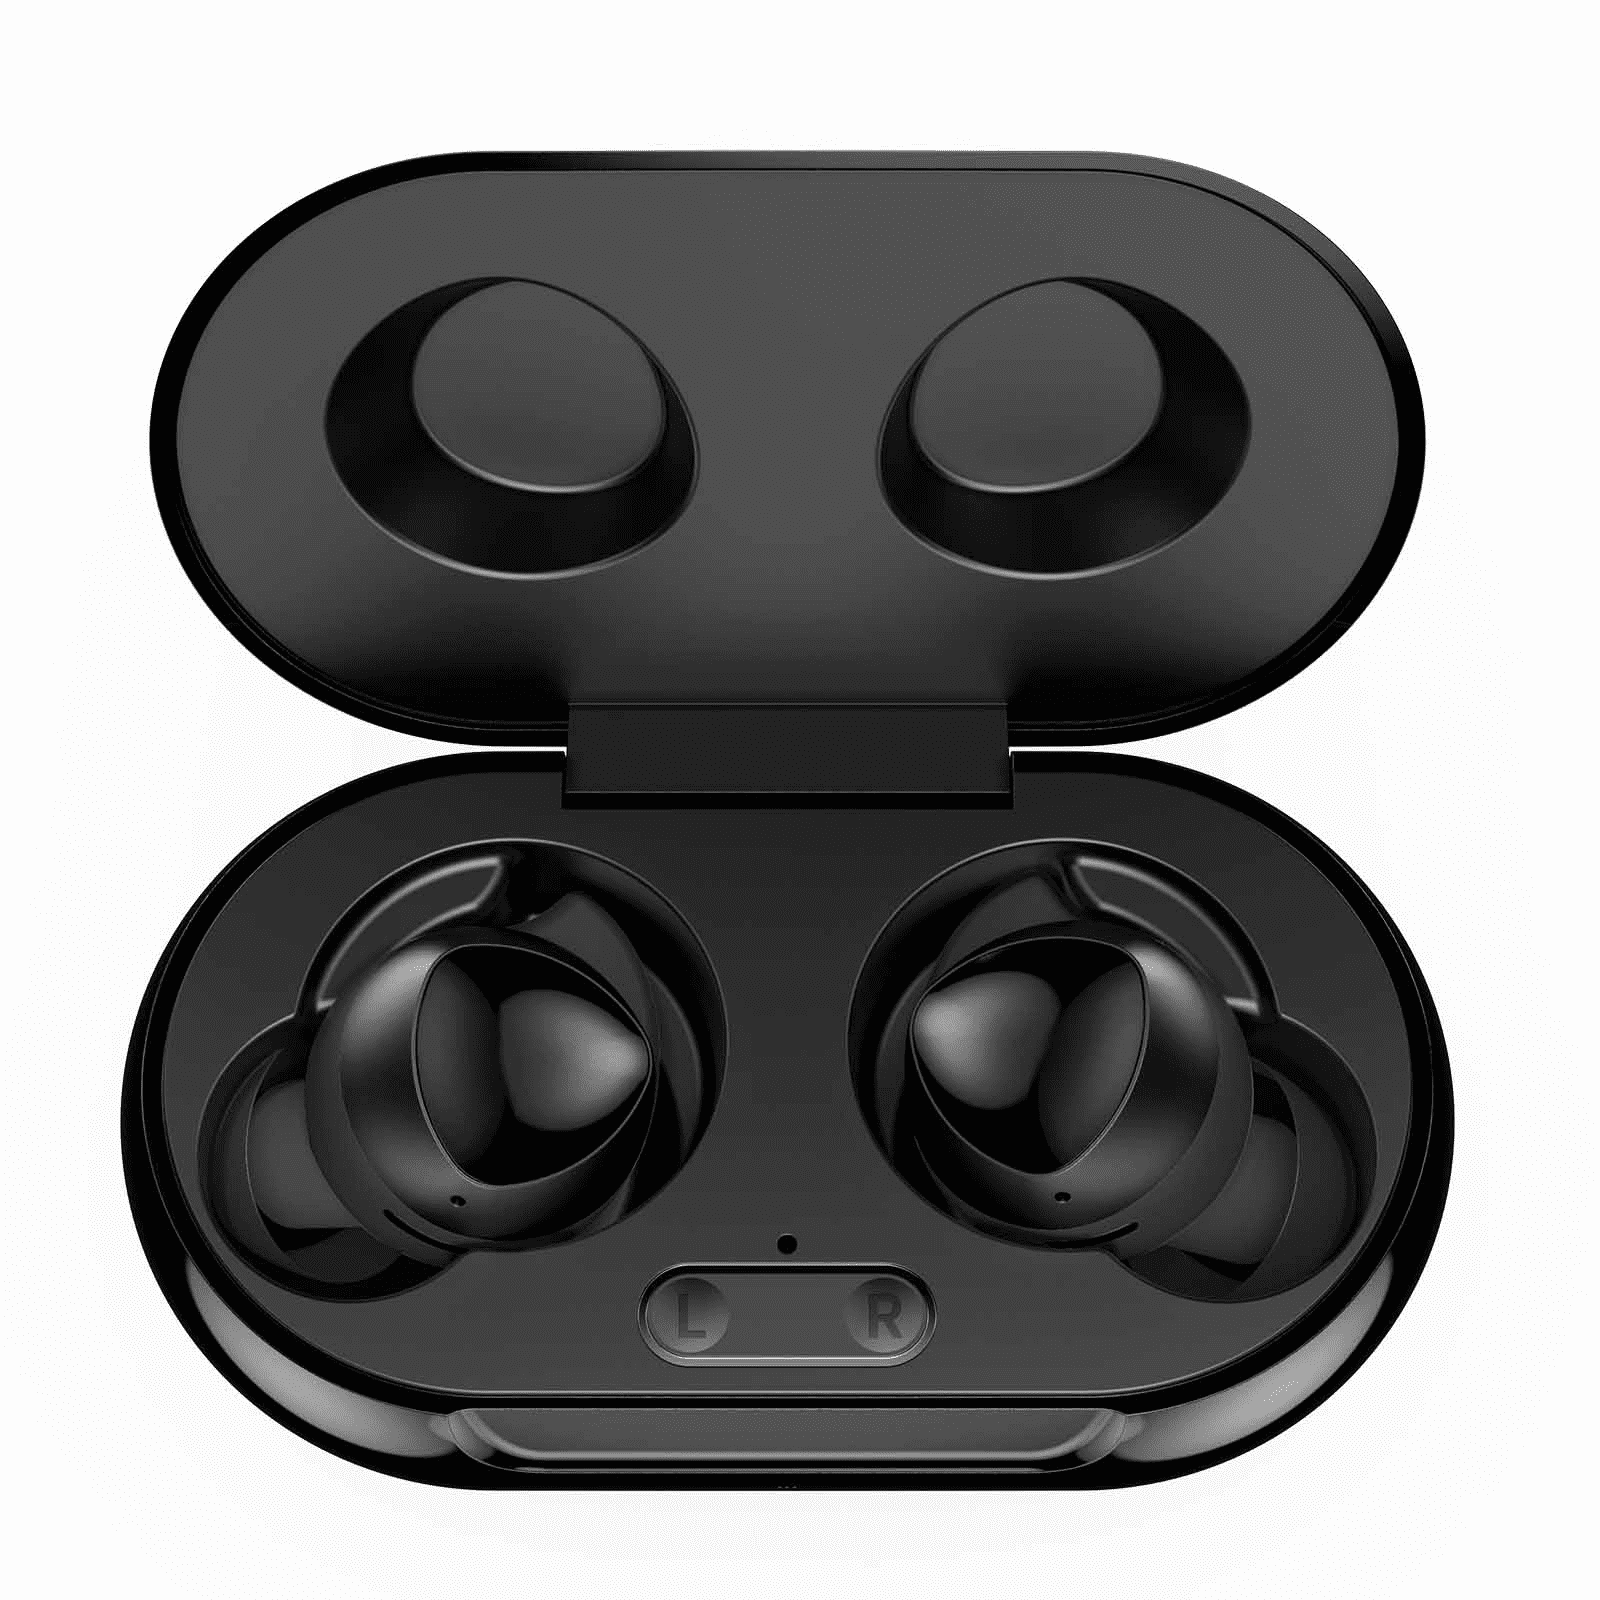 UrbanX Street Buds Plus For Cat S42 H+ - True Wireless Earbuds w/Hands Free  Controls (Wireless Charging Case Included) - Black